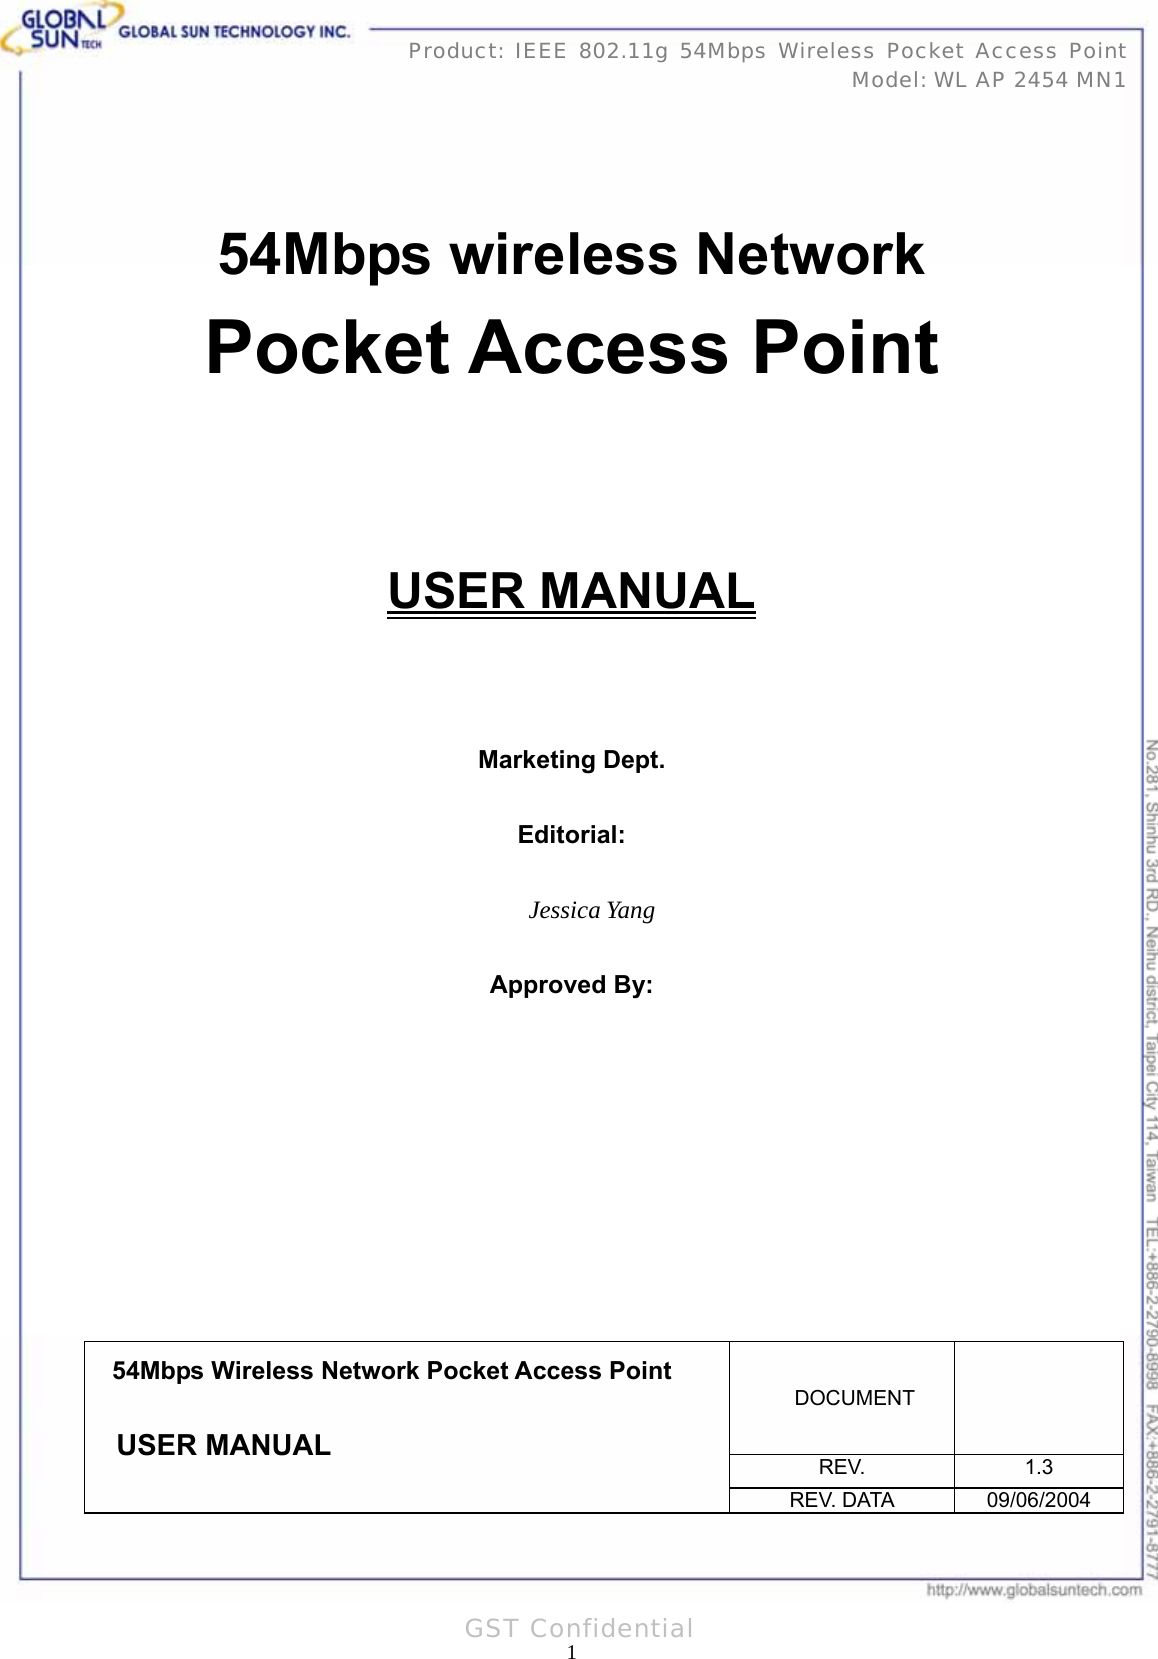   1Product: IEEE 802.11g 54Mbps Wireless Pocket Access Point Model: WL AP 2454 MN1GST Confidential    54Mbps wireless Network Pocket Access Point   USER MANUAL    Marketing Dept.  Editorial:  Jessica Yang  Approved By:          DOCUMENT  REV. 1.3 54Mbps Wireless Network Pocket Access Point USER MANUAL     REV. DATA  09/06/2004 